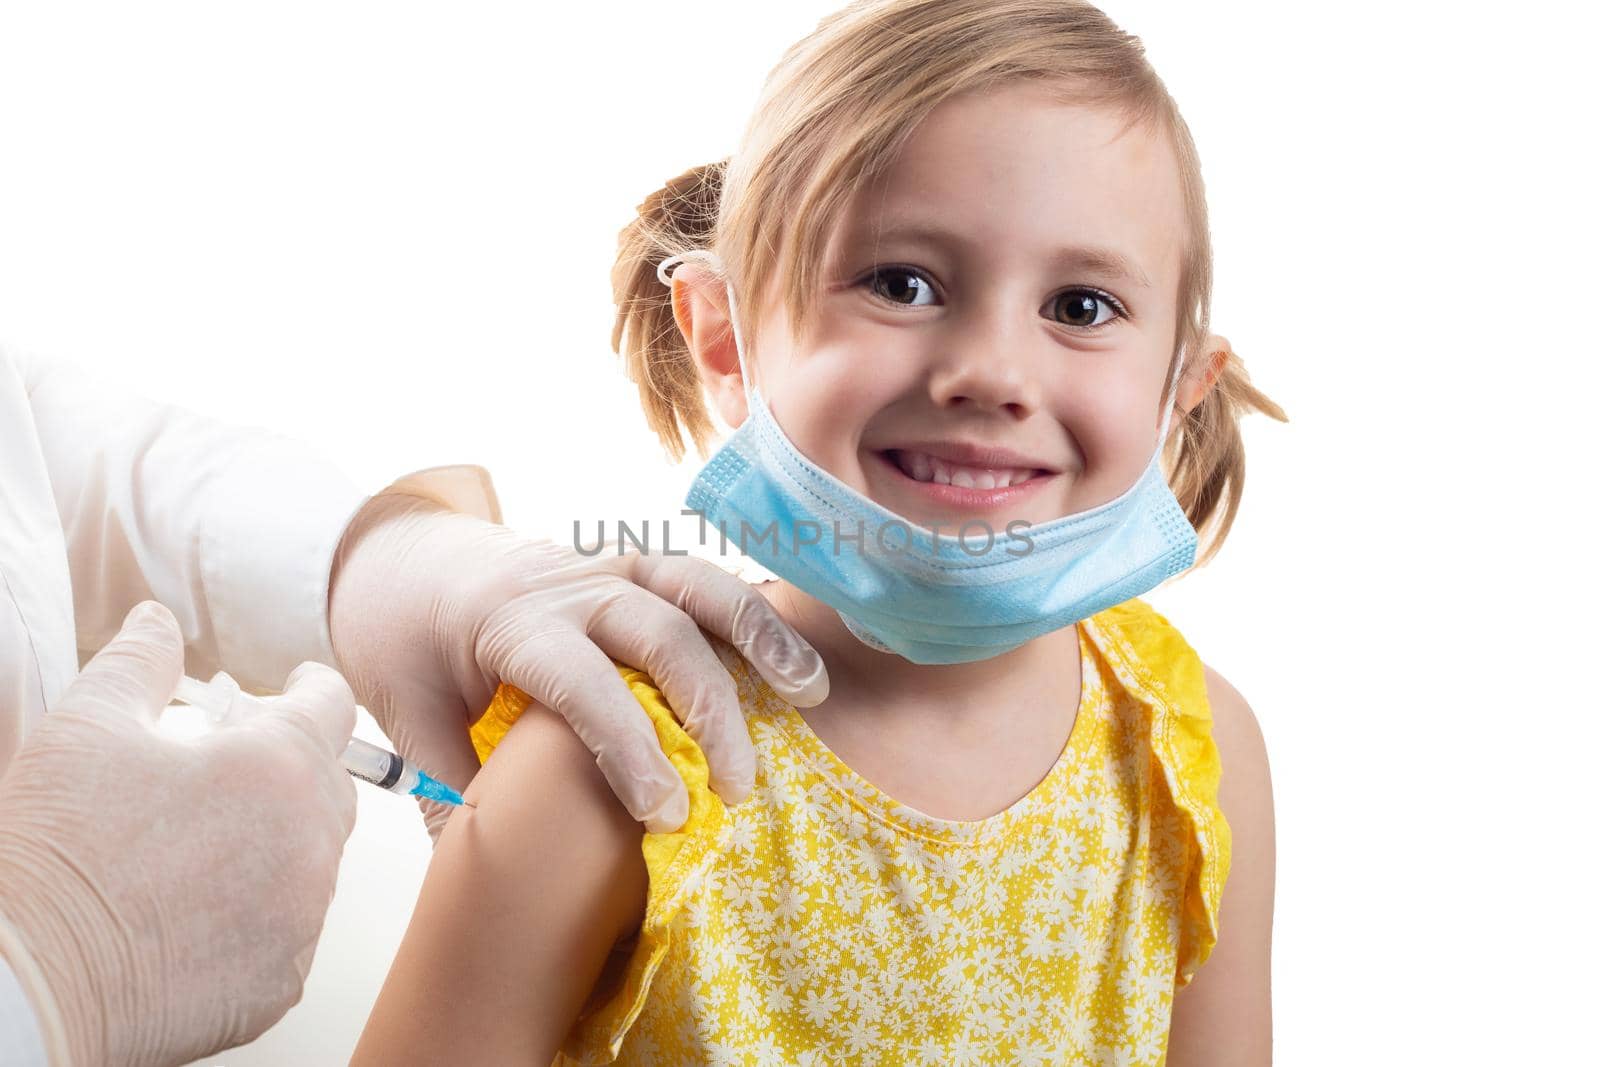 Vaccination concept in the era of coronavirus. Doctor vaccinating cute smiling little girl wearing yellow dress and facial protective mask on white background.